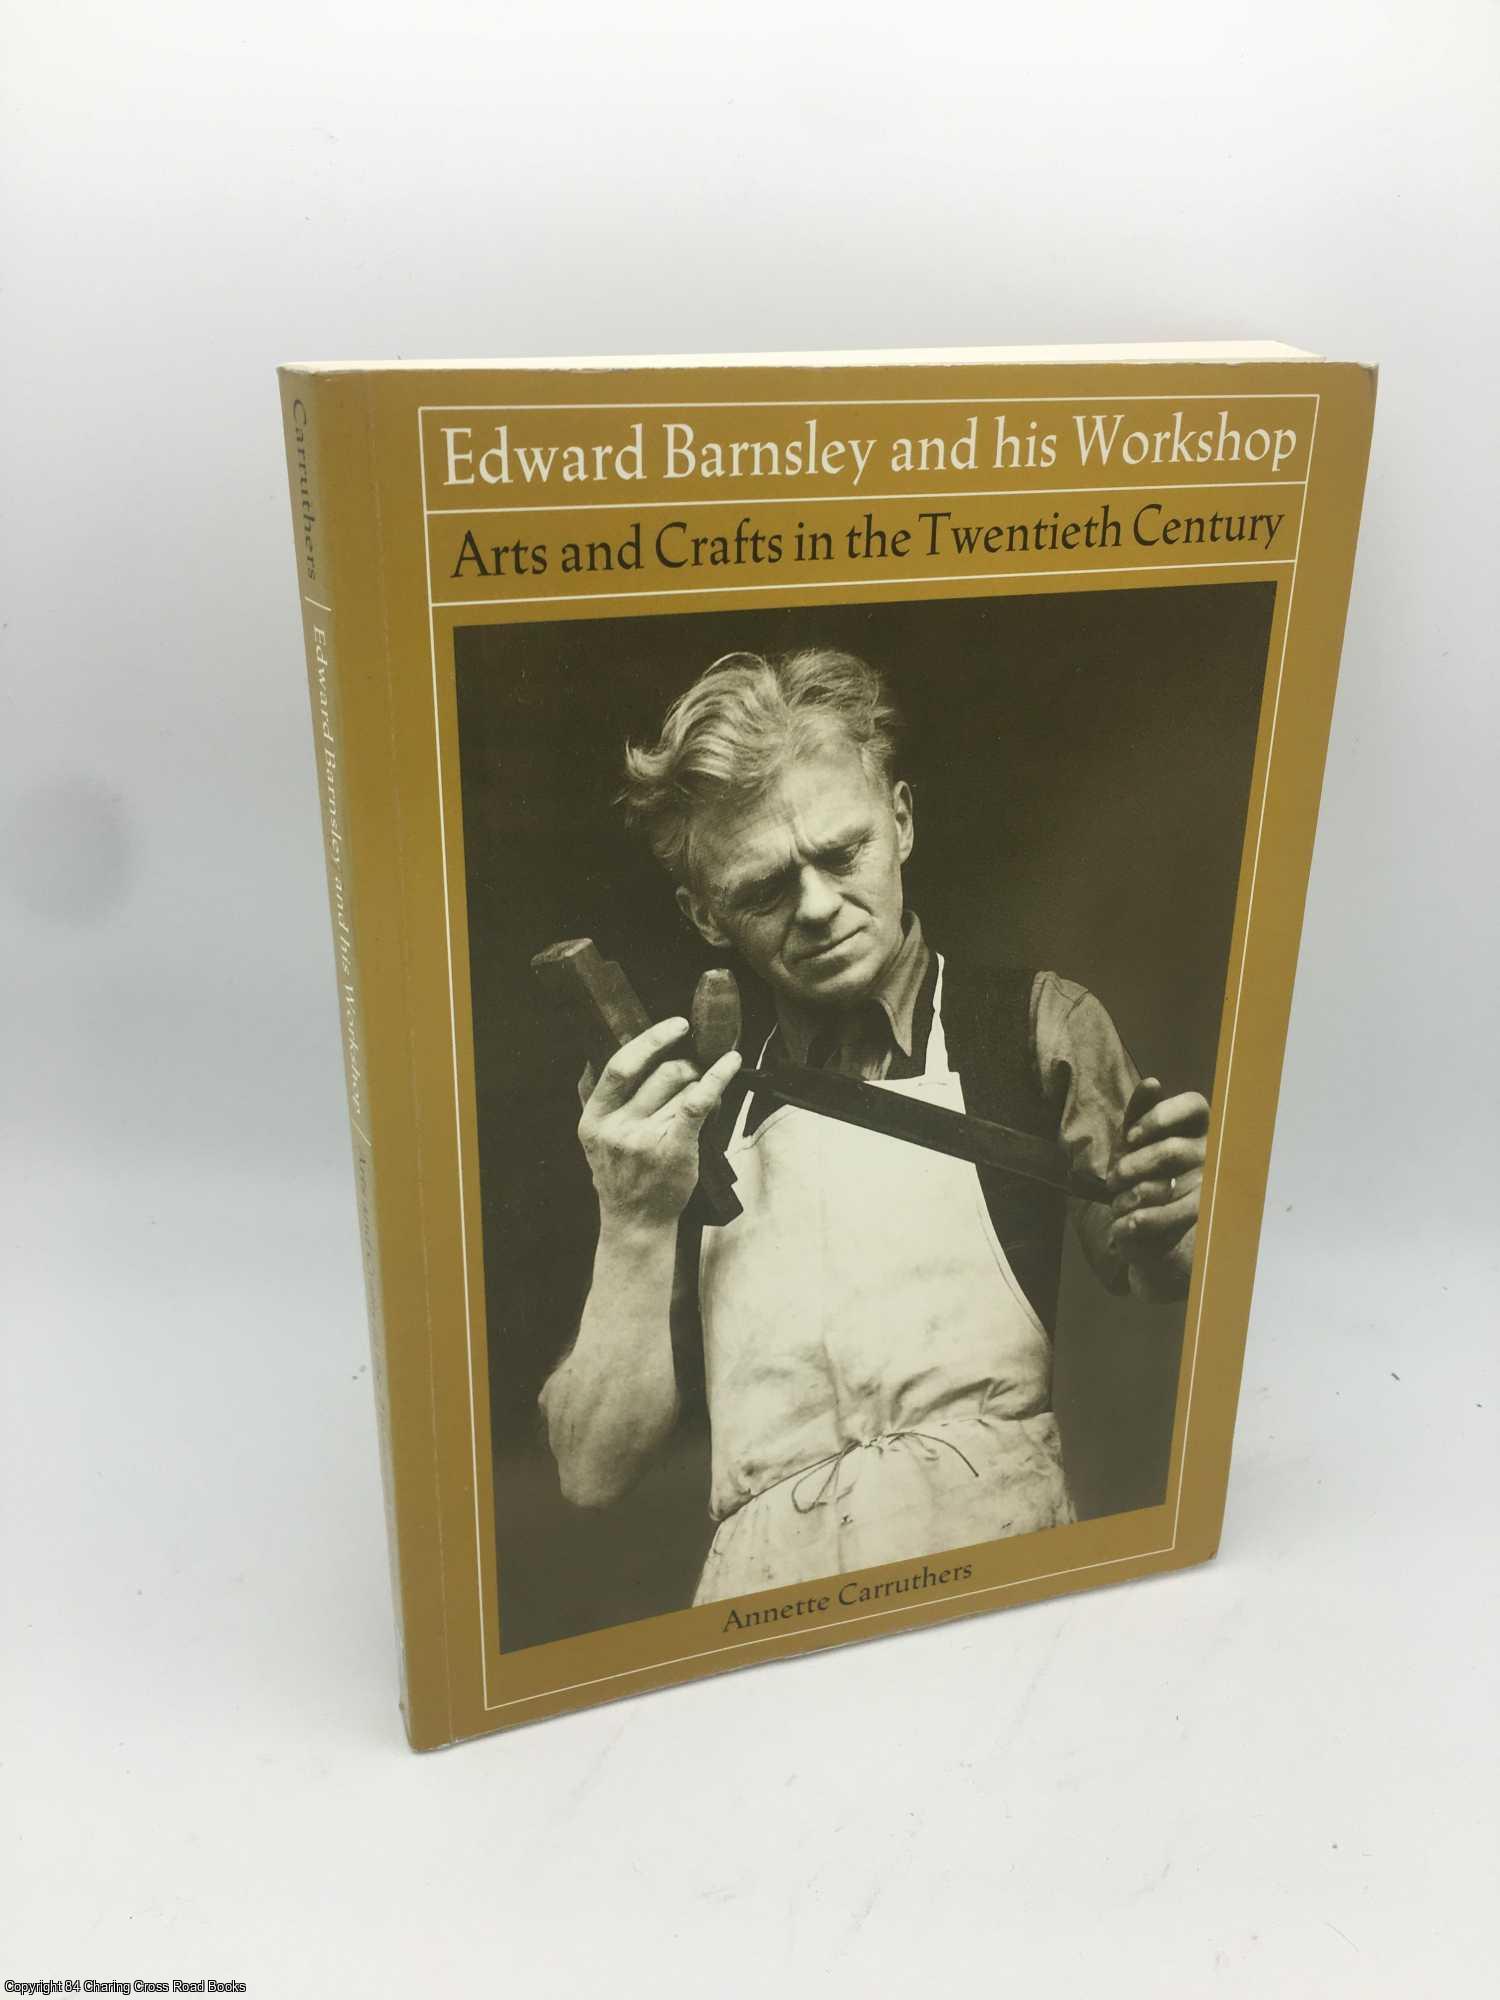 Carruthers, Annette - Edward Barnsley and His Workshop: Arts and Crafts in the Twentieth Century